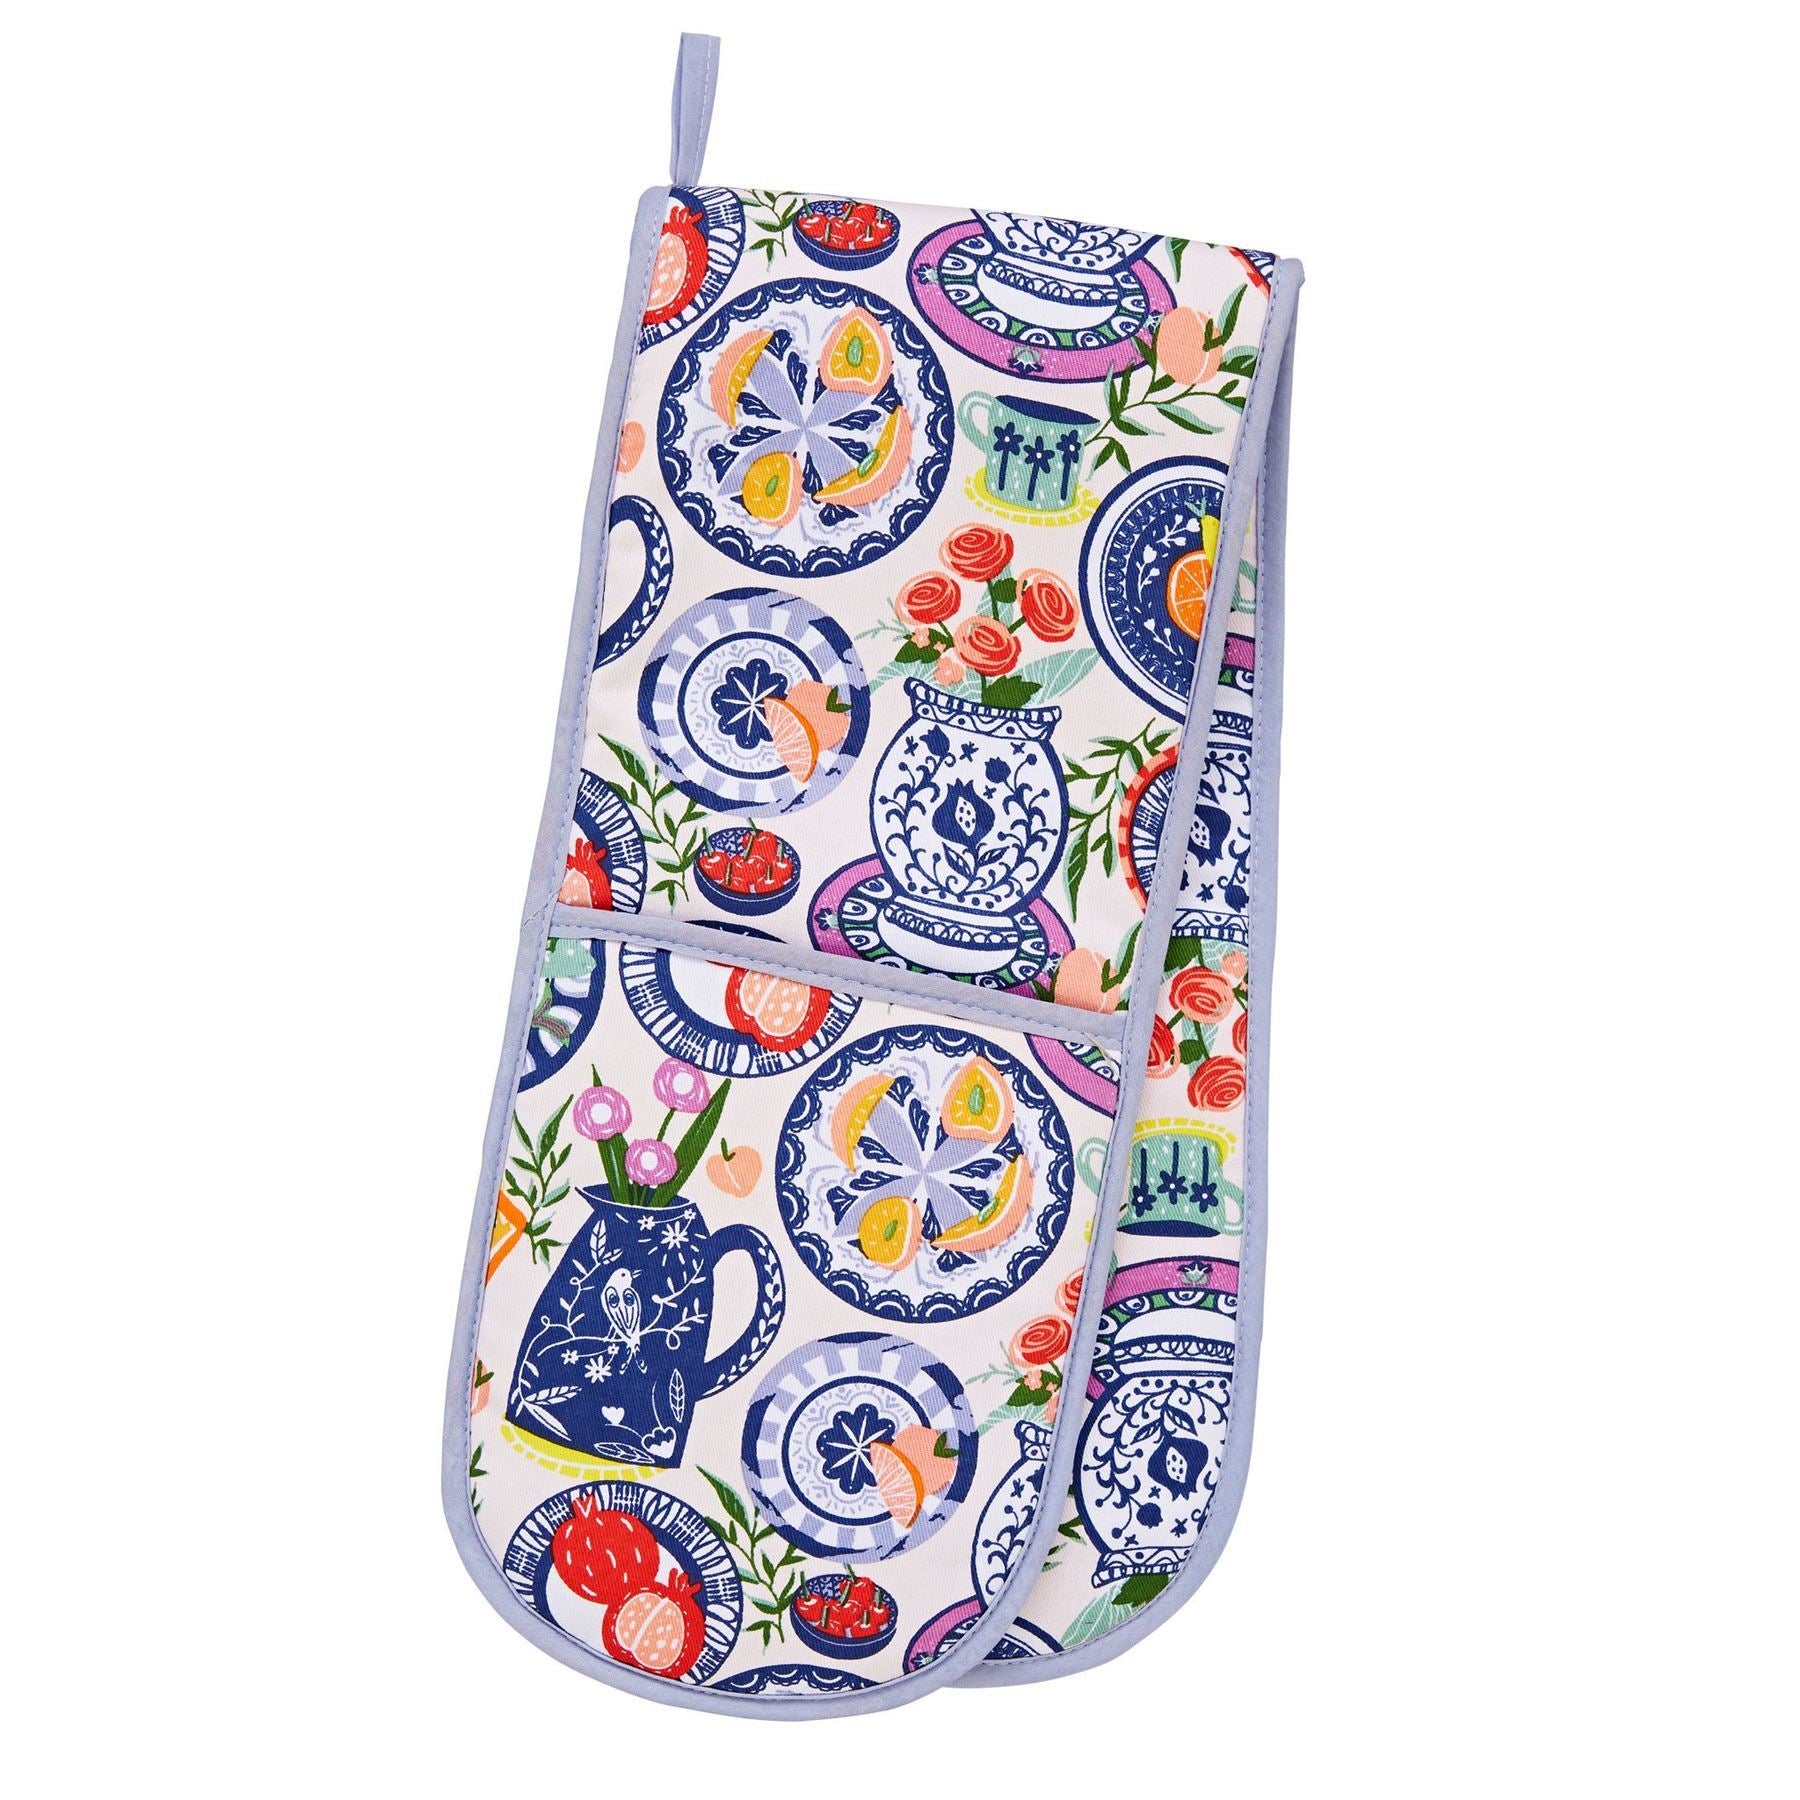 Ulster Weavers Double Oven Glove - Mediterranean Plates (100% Cotton Outer; 100% Polyester wadding; CE marked) - Double Oven Gloves - Ulster Weavers